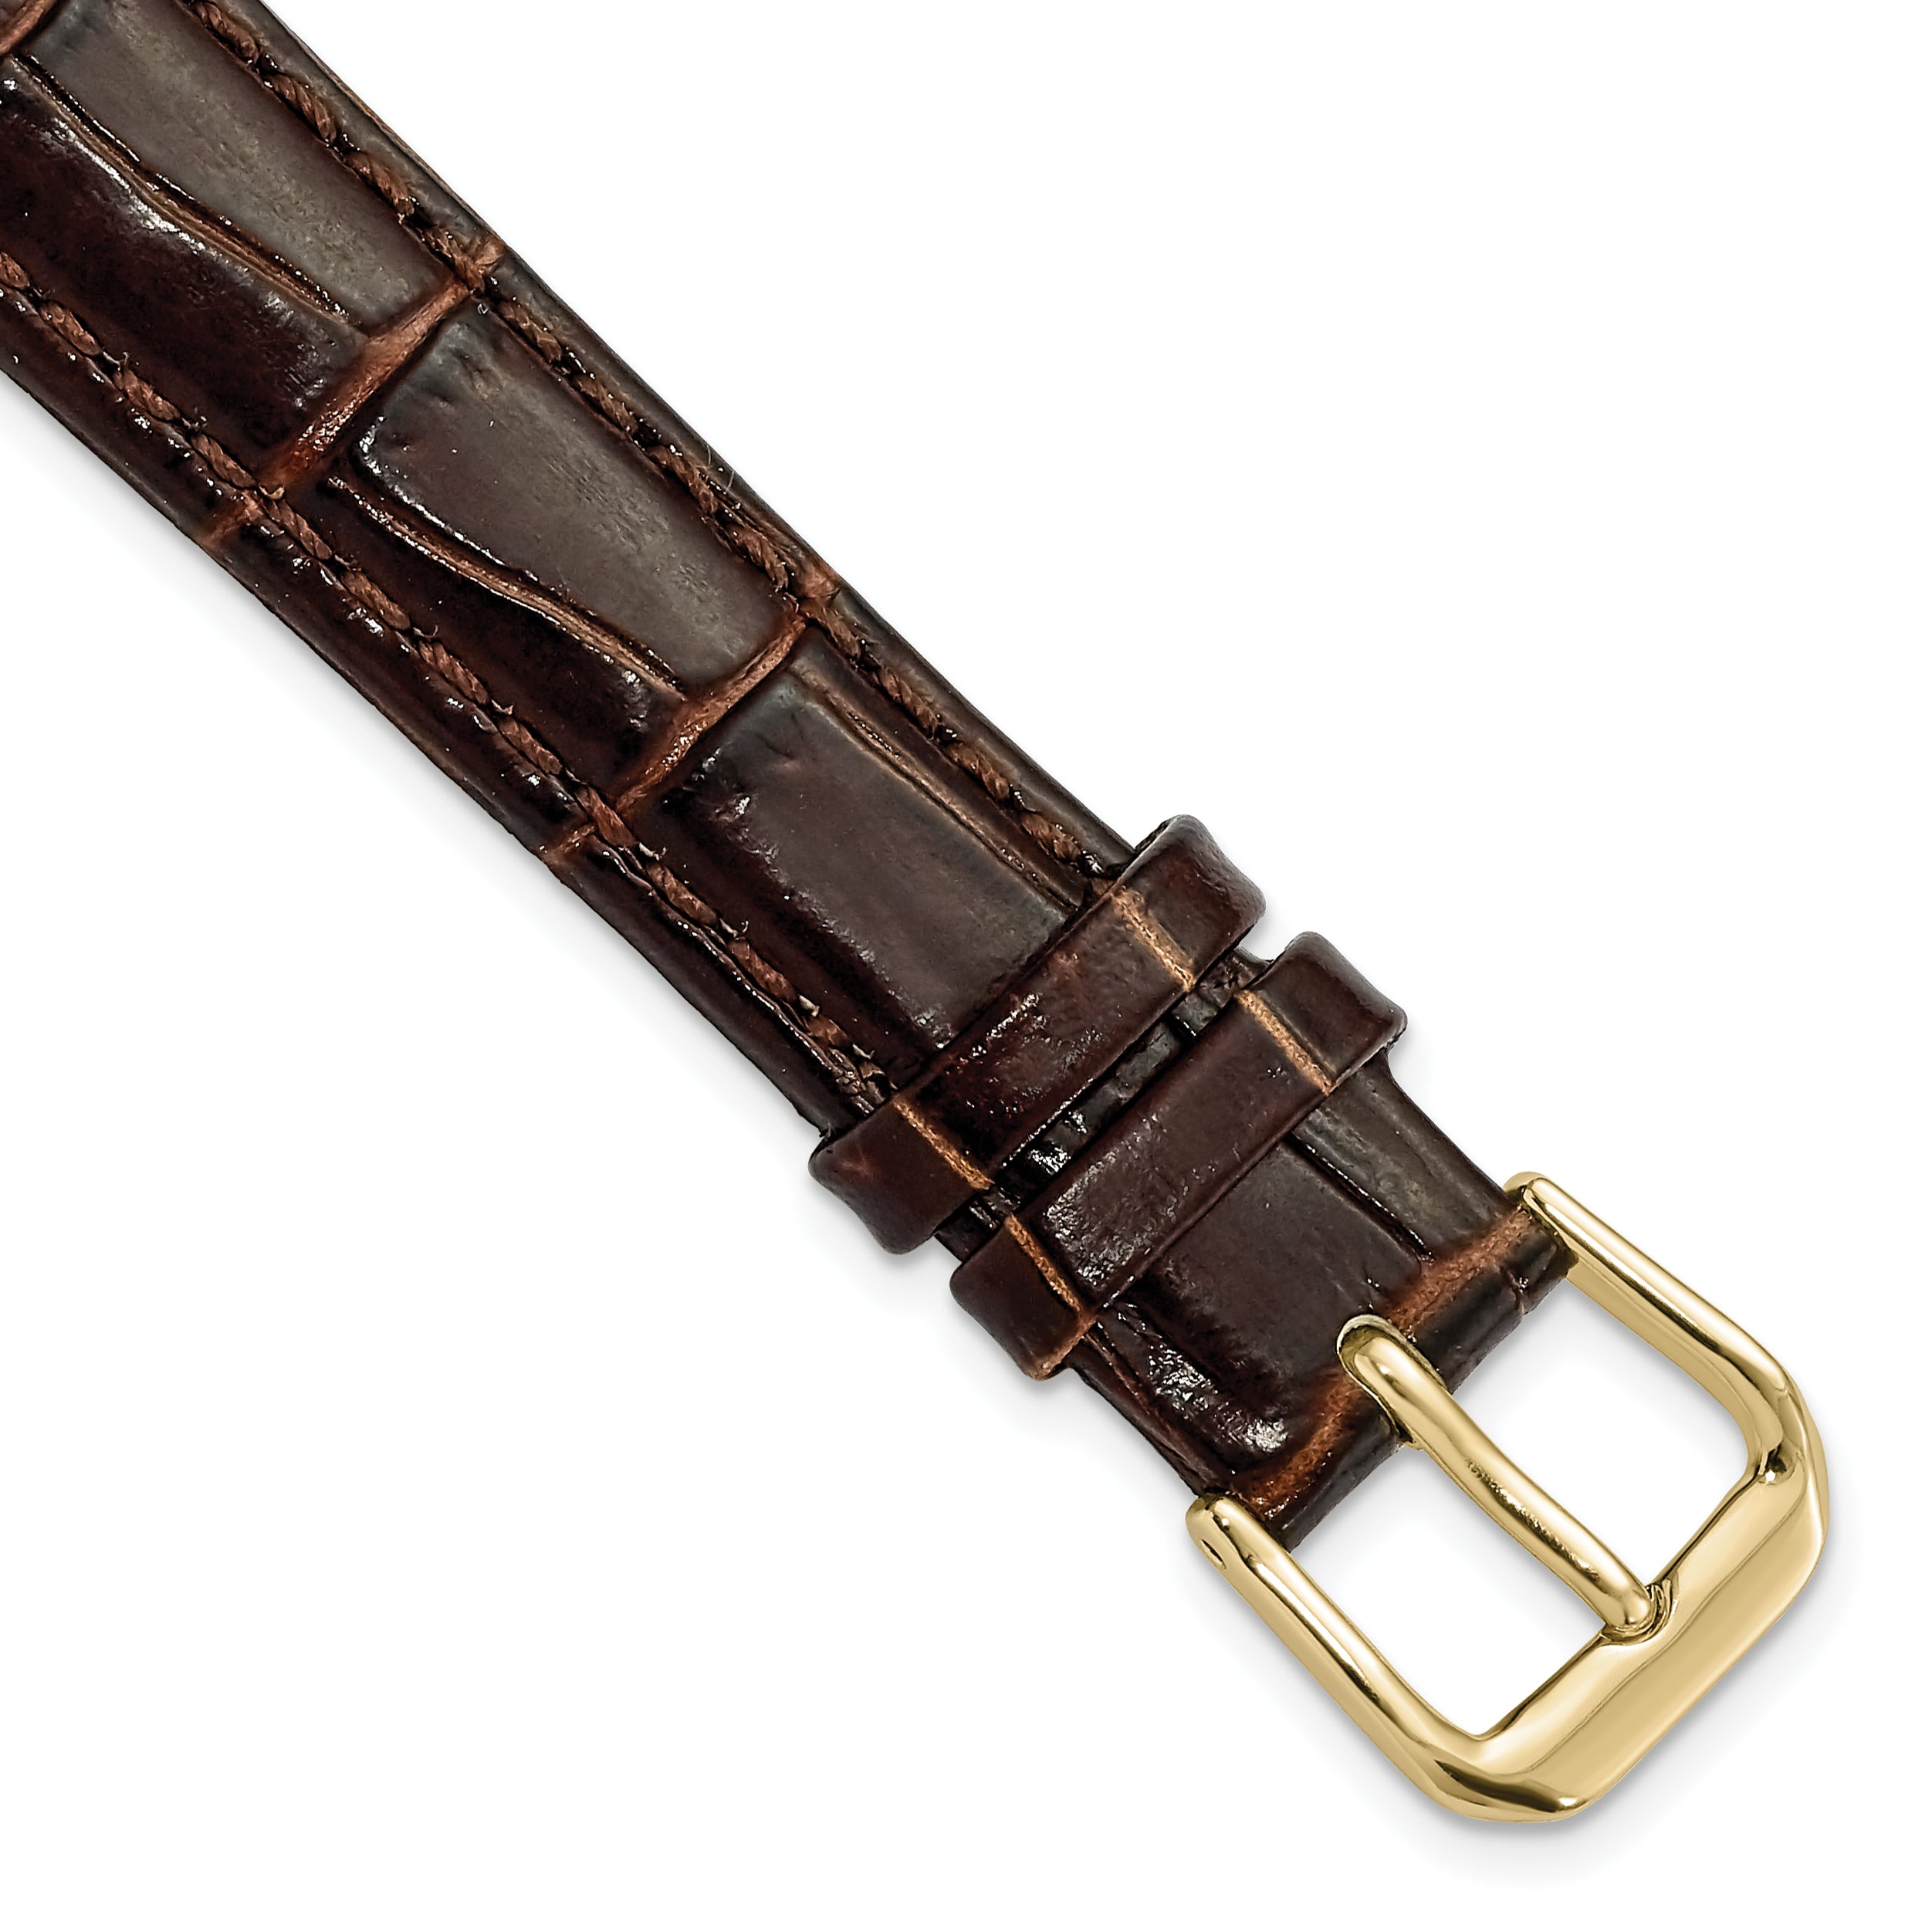 DeBeer 14mm Brown Crocodile Grain Leather with Dark Stitching and Gold-tone Buckle 6.75 inch Watch Band